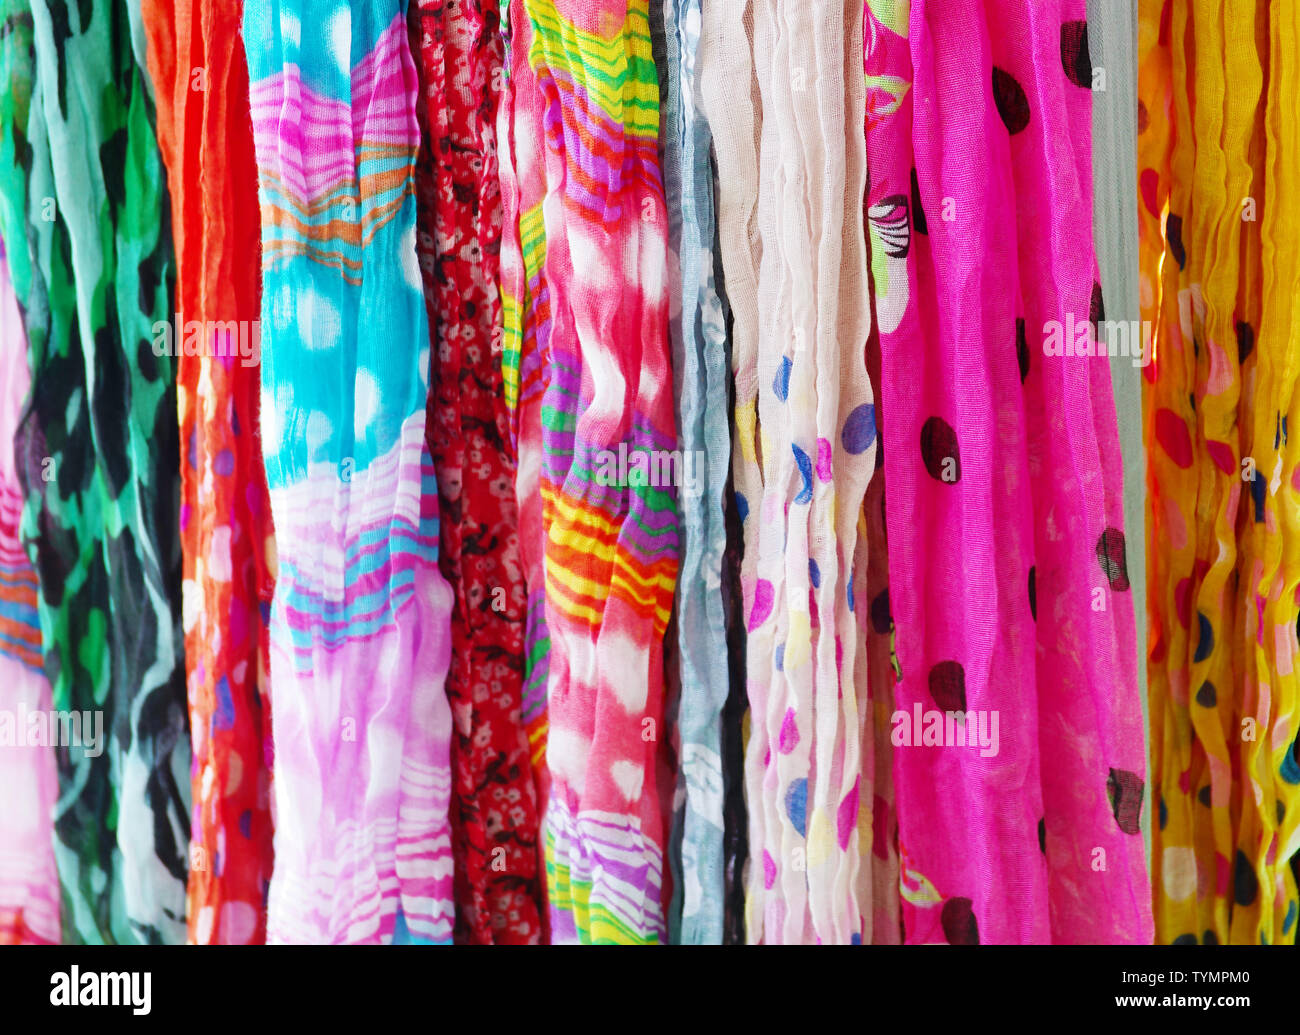 Many colorful linen scarfs hanging for sale Stock Photo